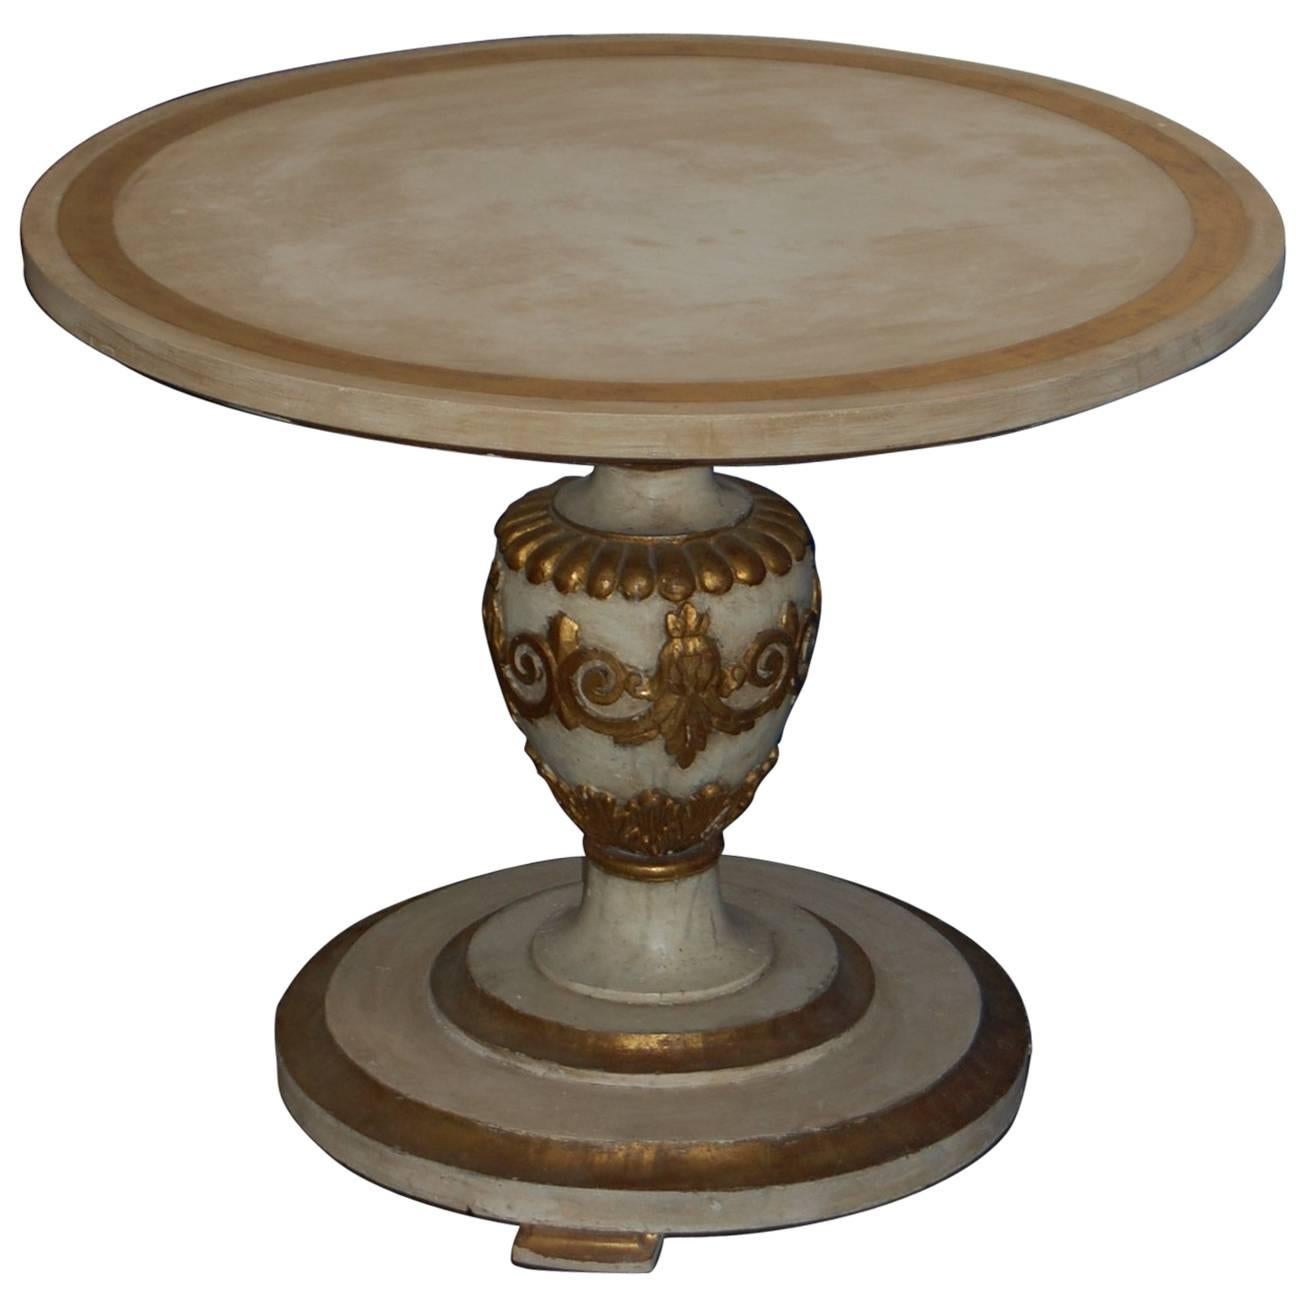 Mid-20th Century Painted Italian Table with Carved Urn Column and Gold Accents For Sale